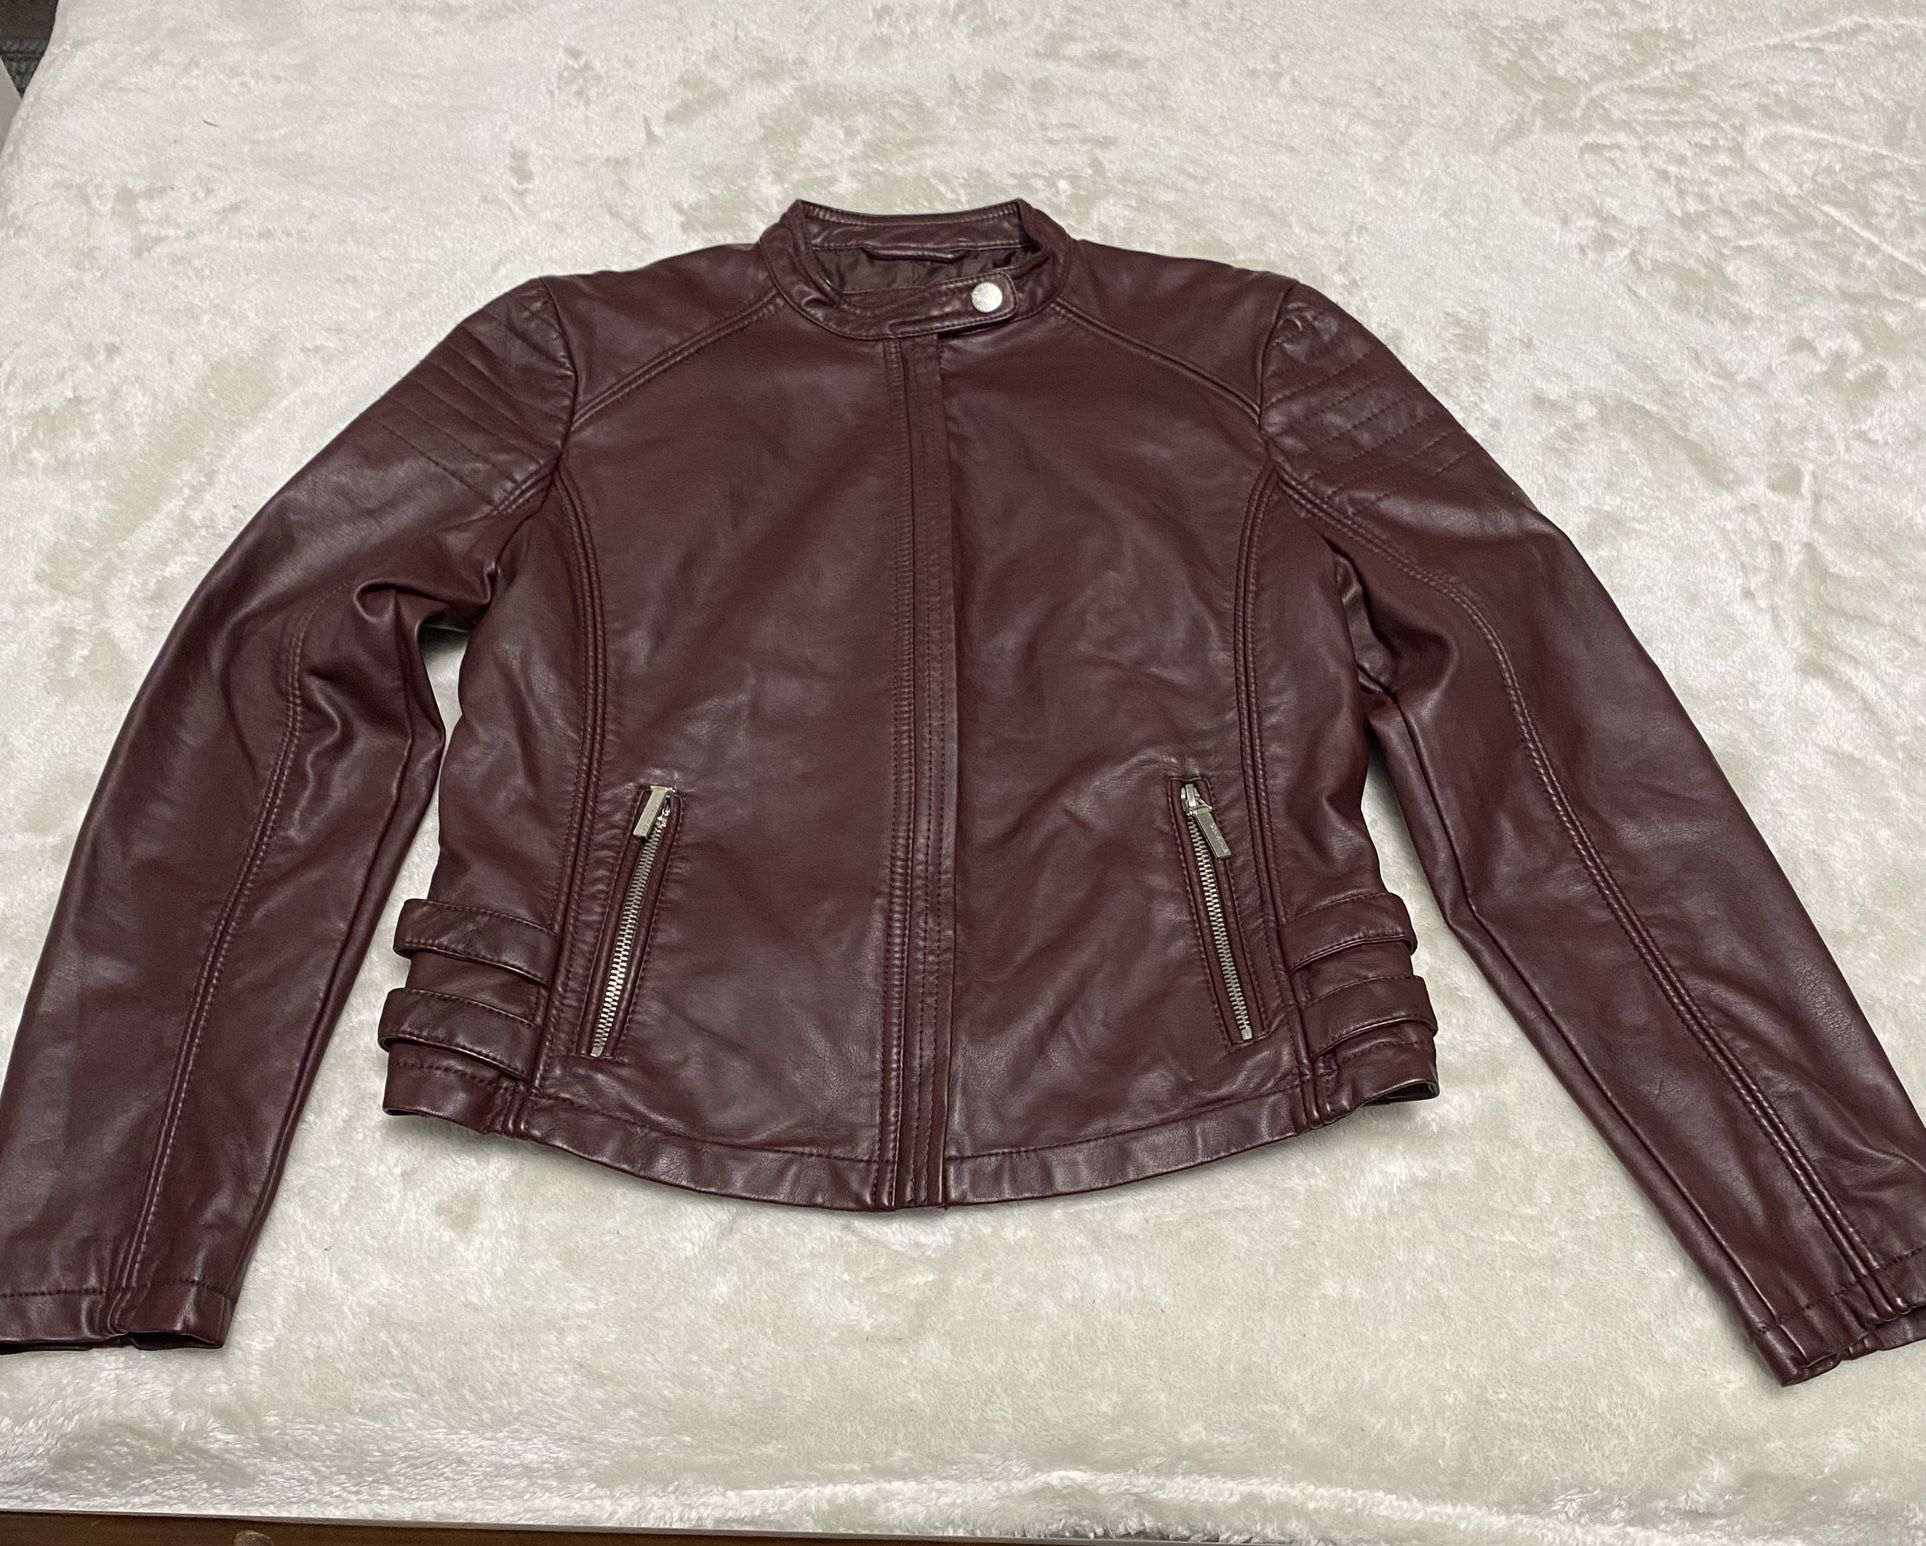 Casual leather jacket for women size 14/16